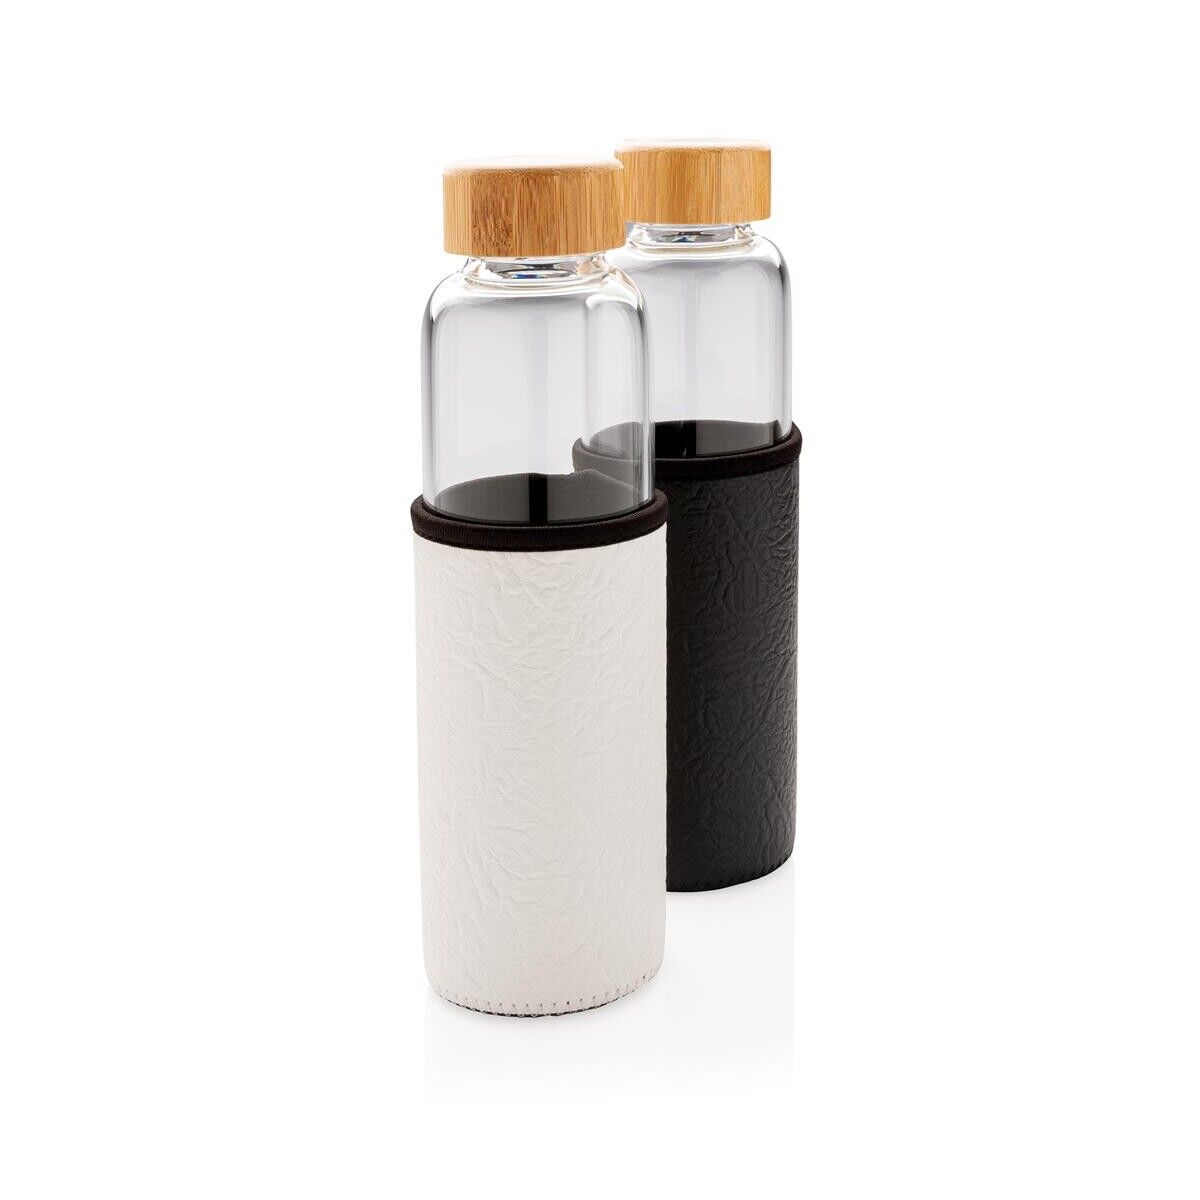 Glass Bottle with PU Sleeve - White and Black sleeve